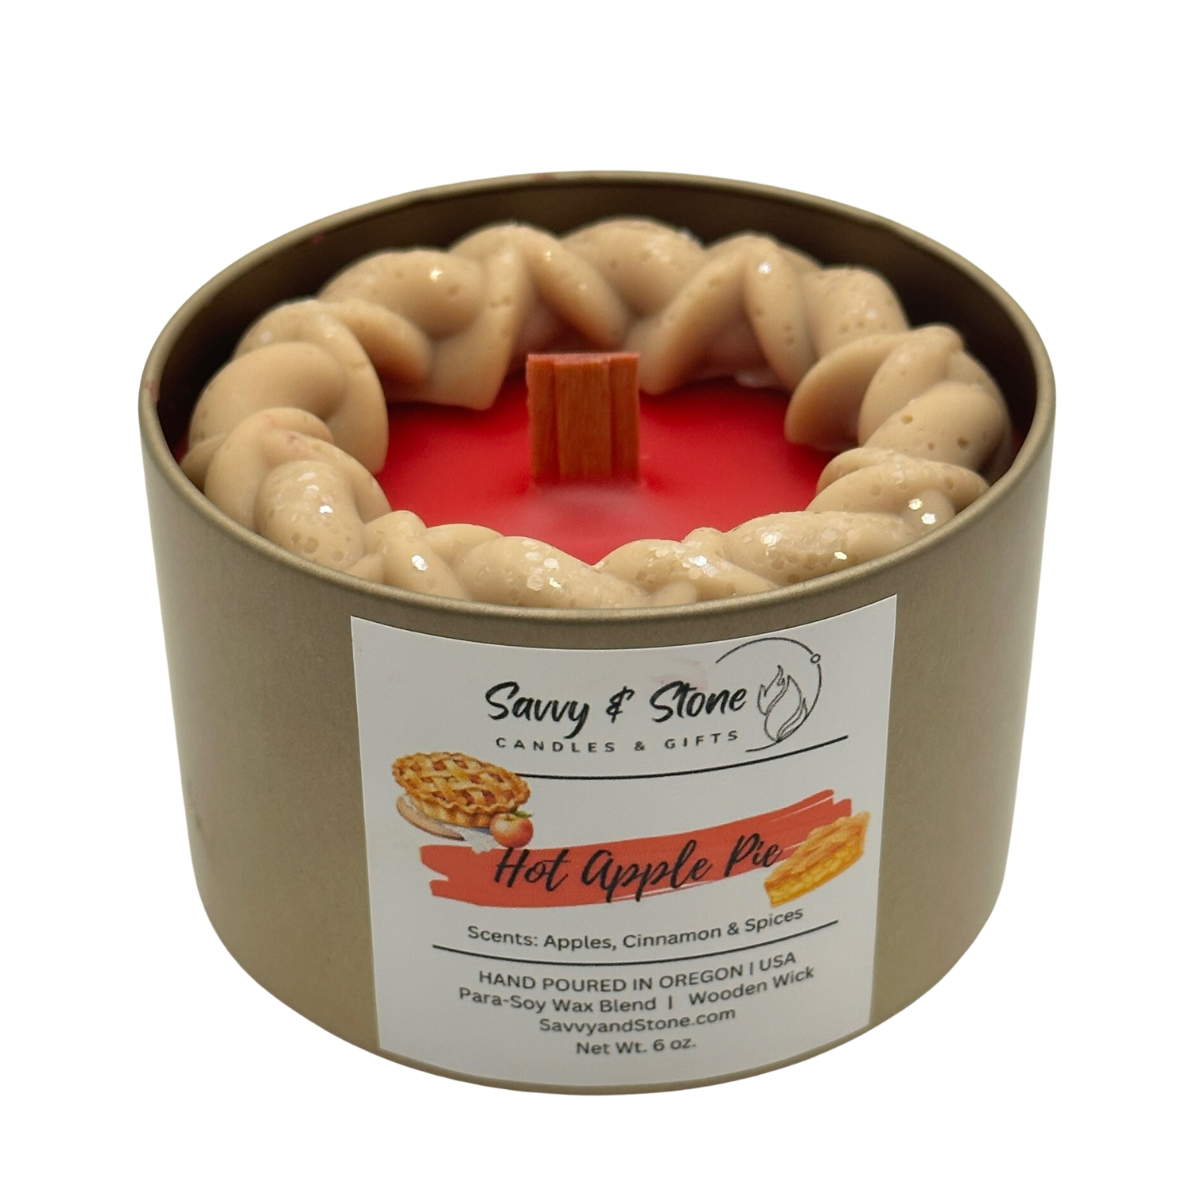 Hot Apple Pie | 6oz Soy Candle with Wooden Wick (Free Shipping over $35)